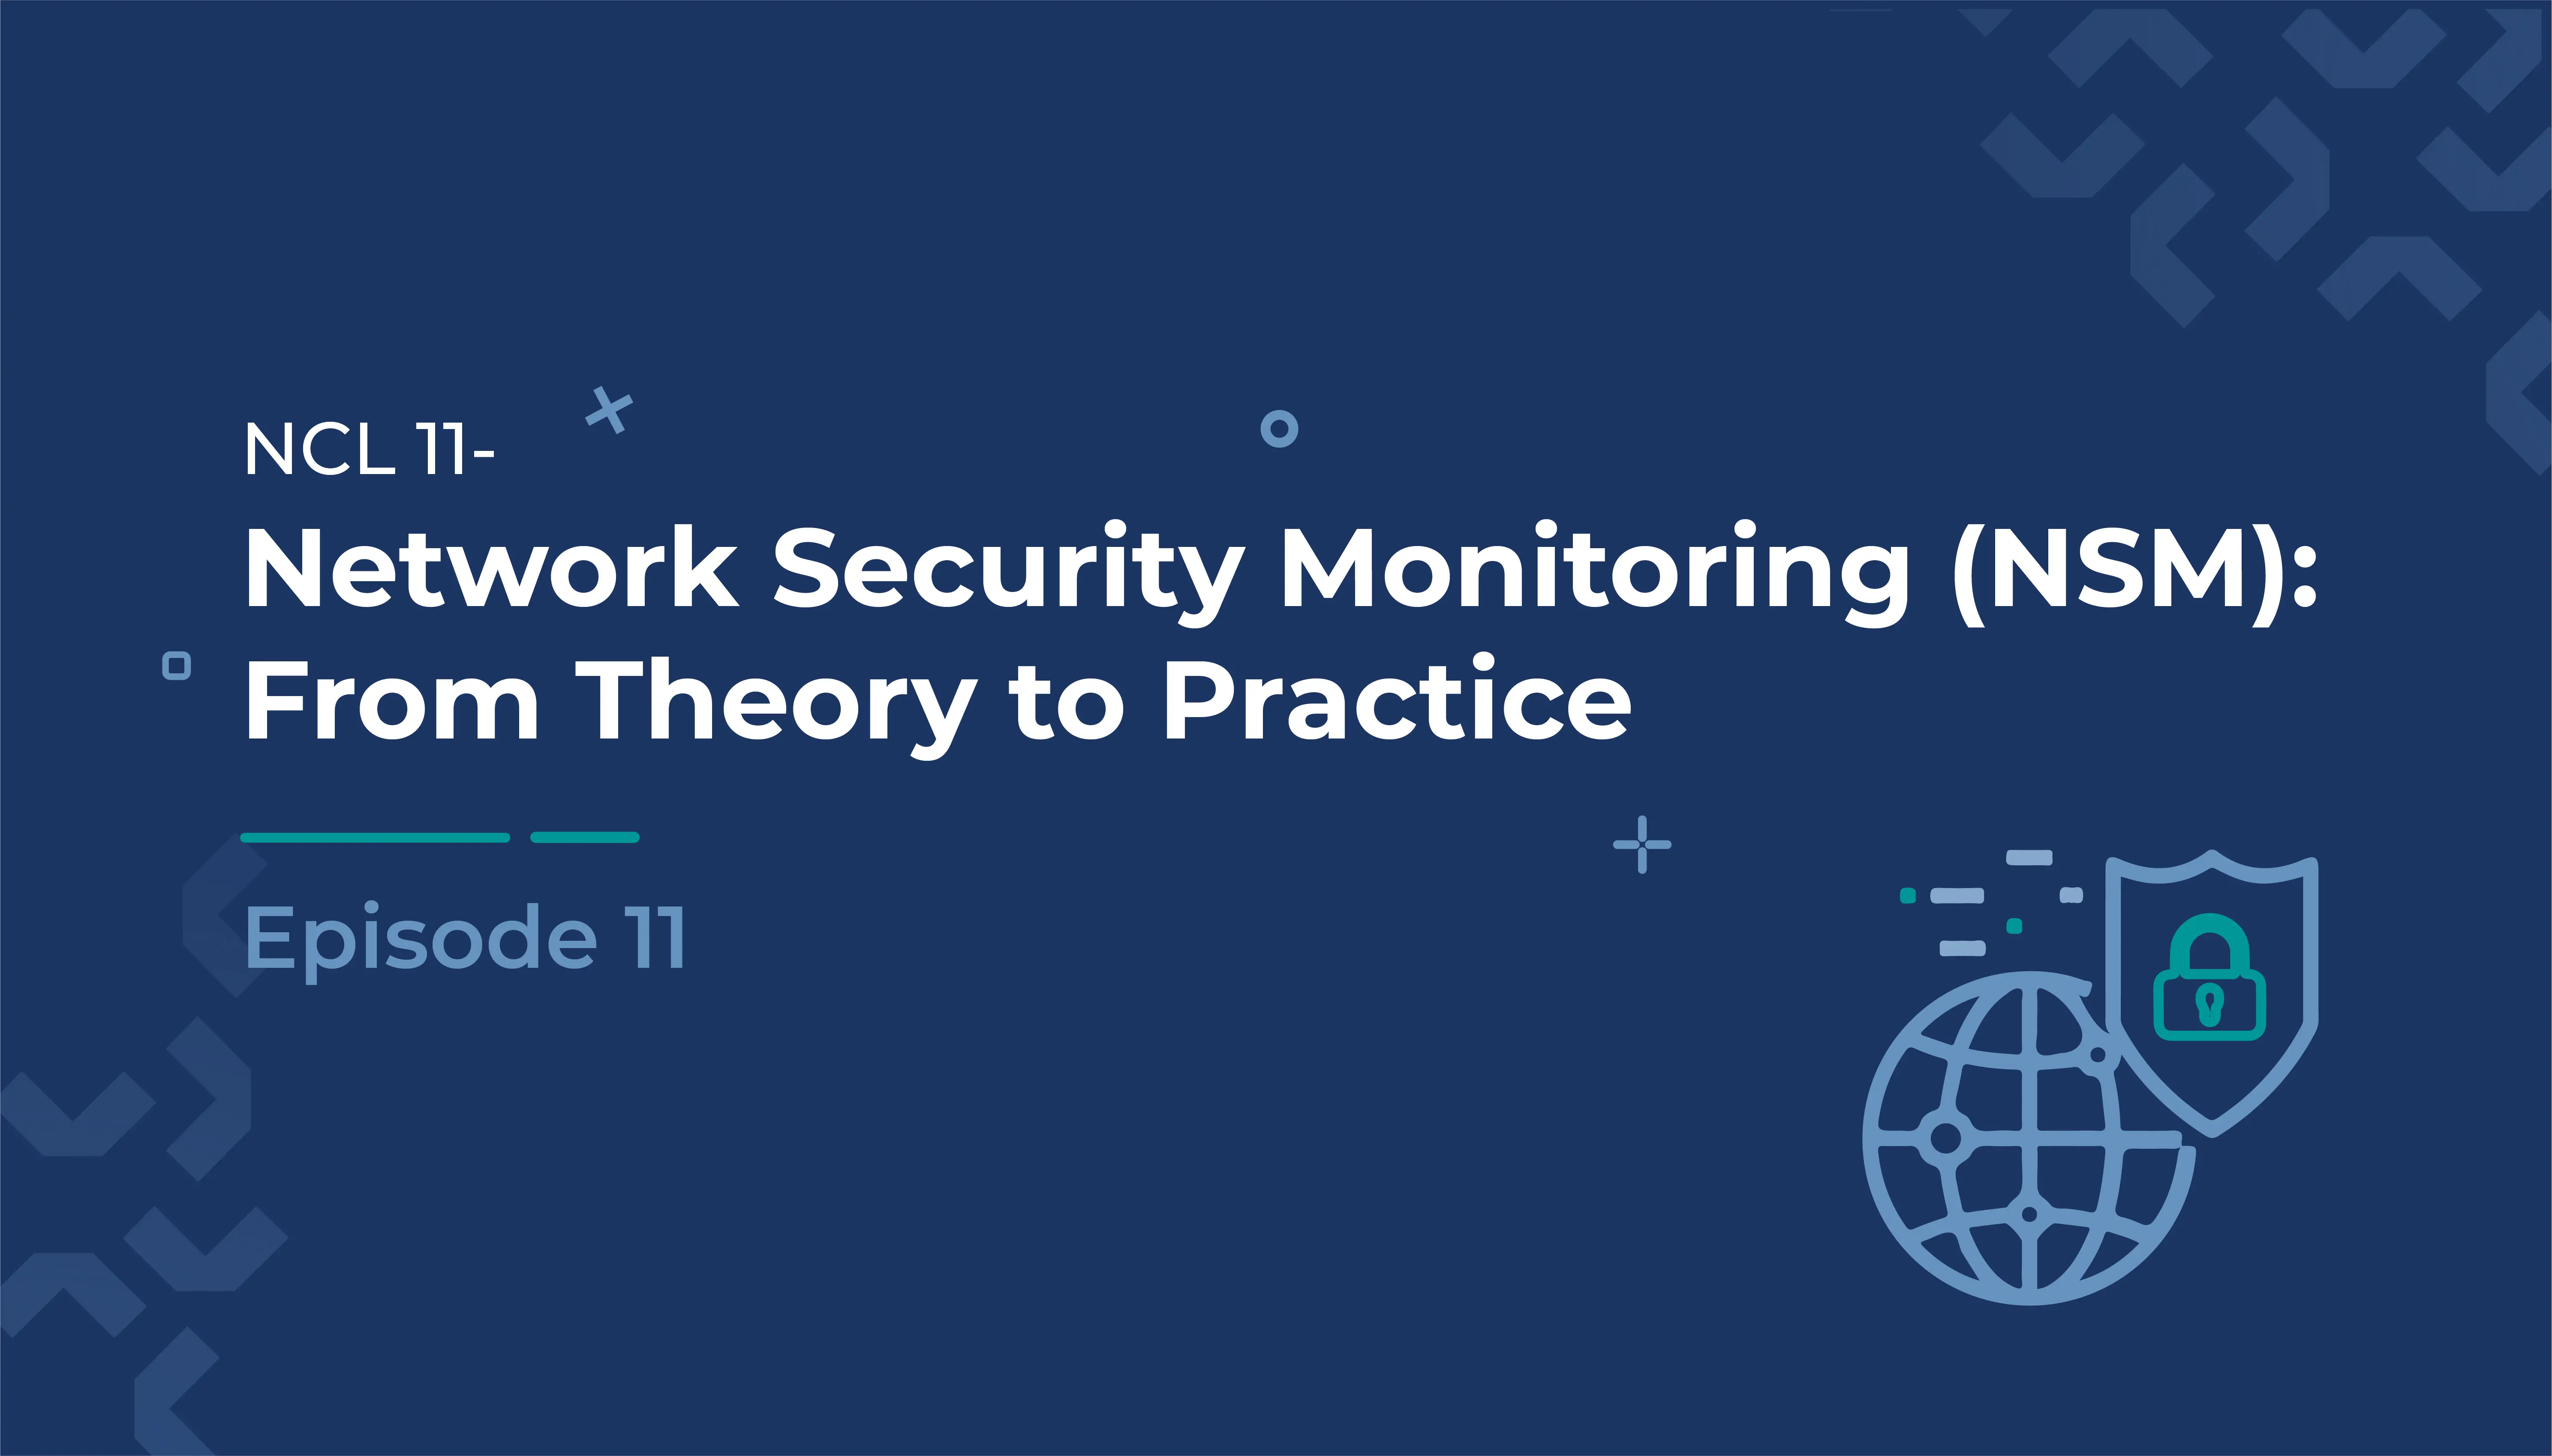 Network Security Monitoring (NSM): From Theory to Practice